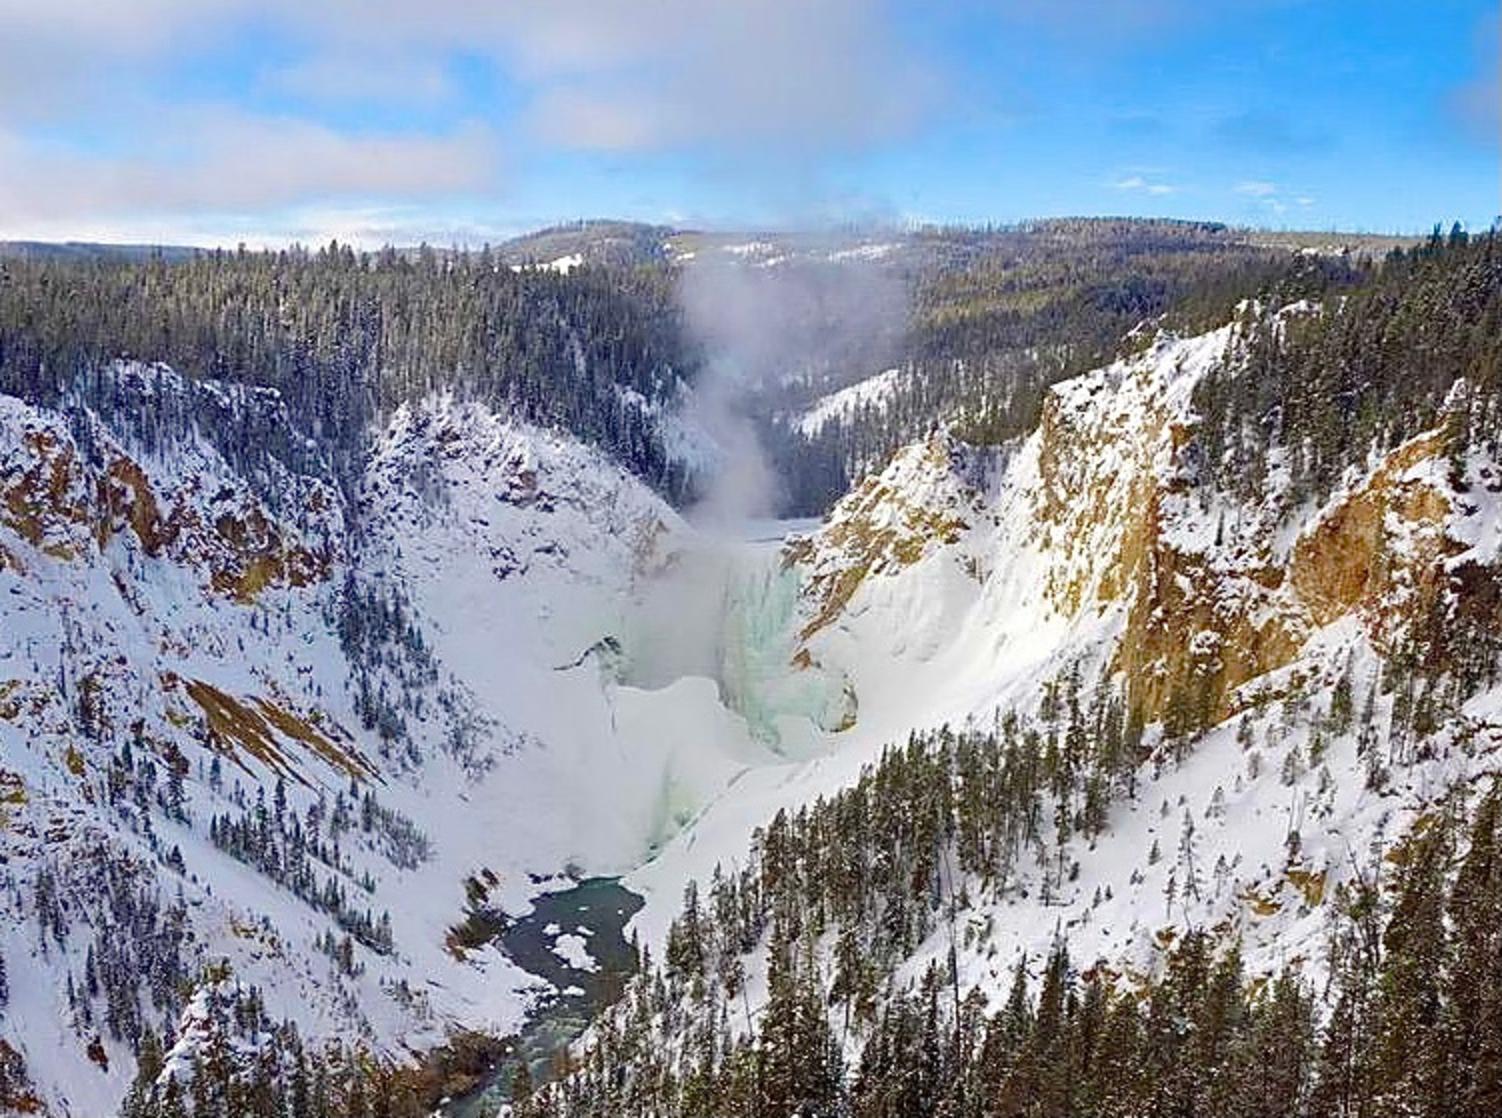 The mighty Grand Canyon of the Yellowstone and its signature focal point, the Lower Falls, has been left to a more muted roar in the aftermath of several days in which the mercury reading remained well below zero. The waterfall is seen in a pastel green sheath, with mist rising as flows from the Yellowstone River tumble into the cold, cold air, turning mist into ice crystals.